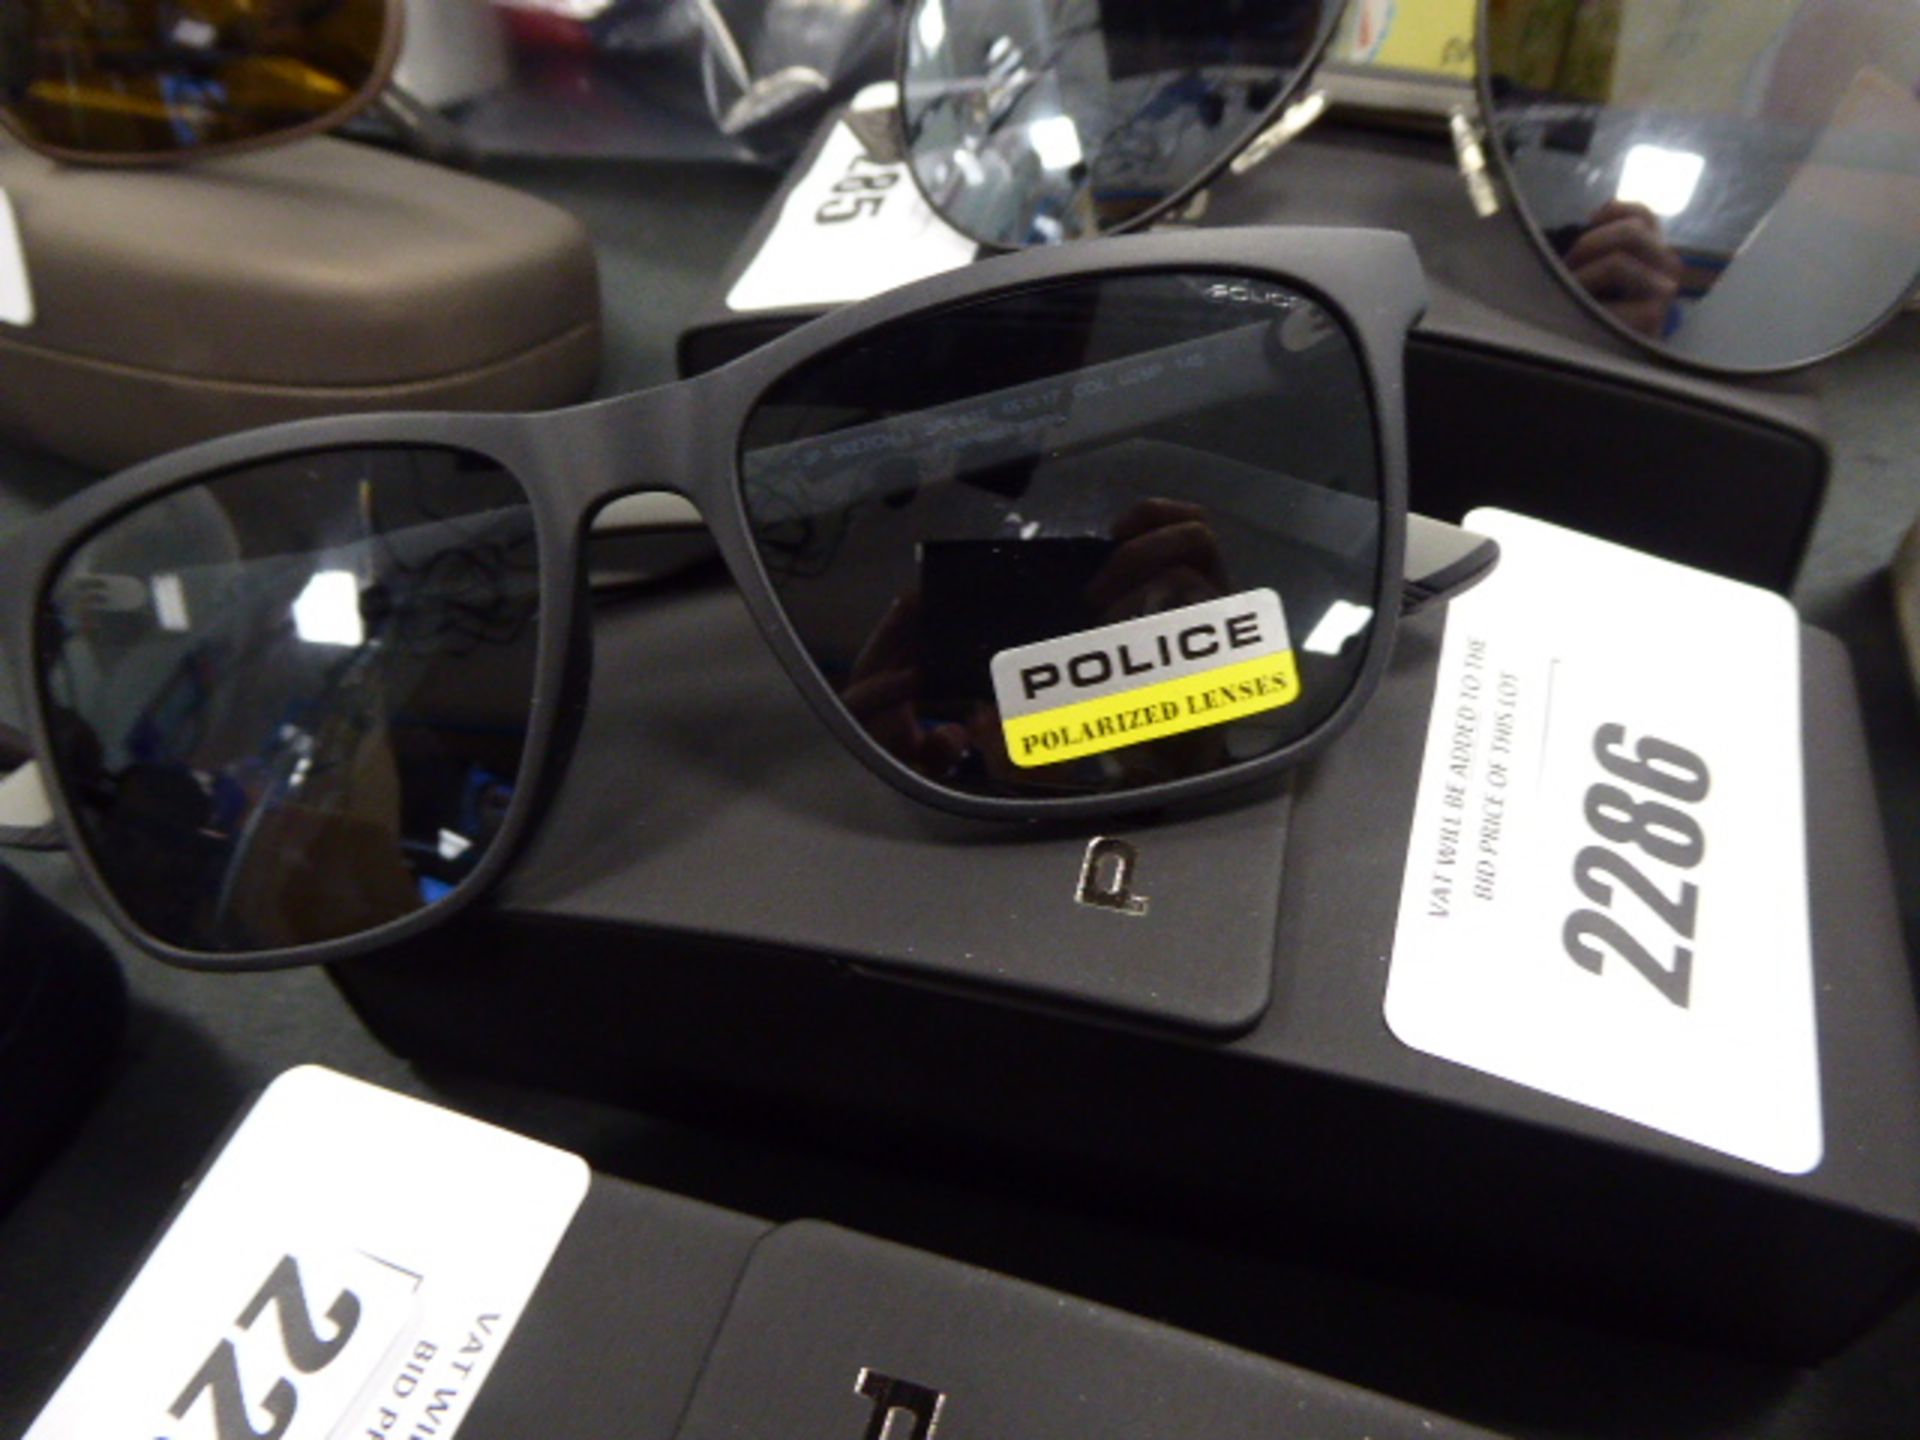 A pair of police sunglasses with hardcase